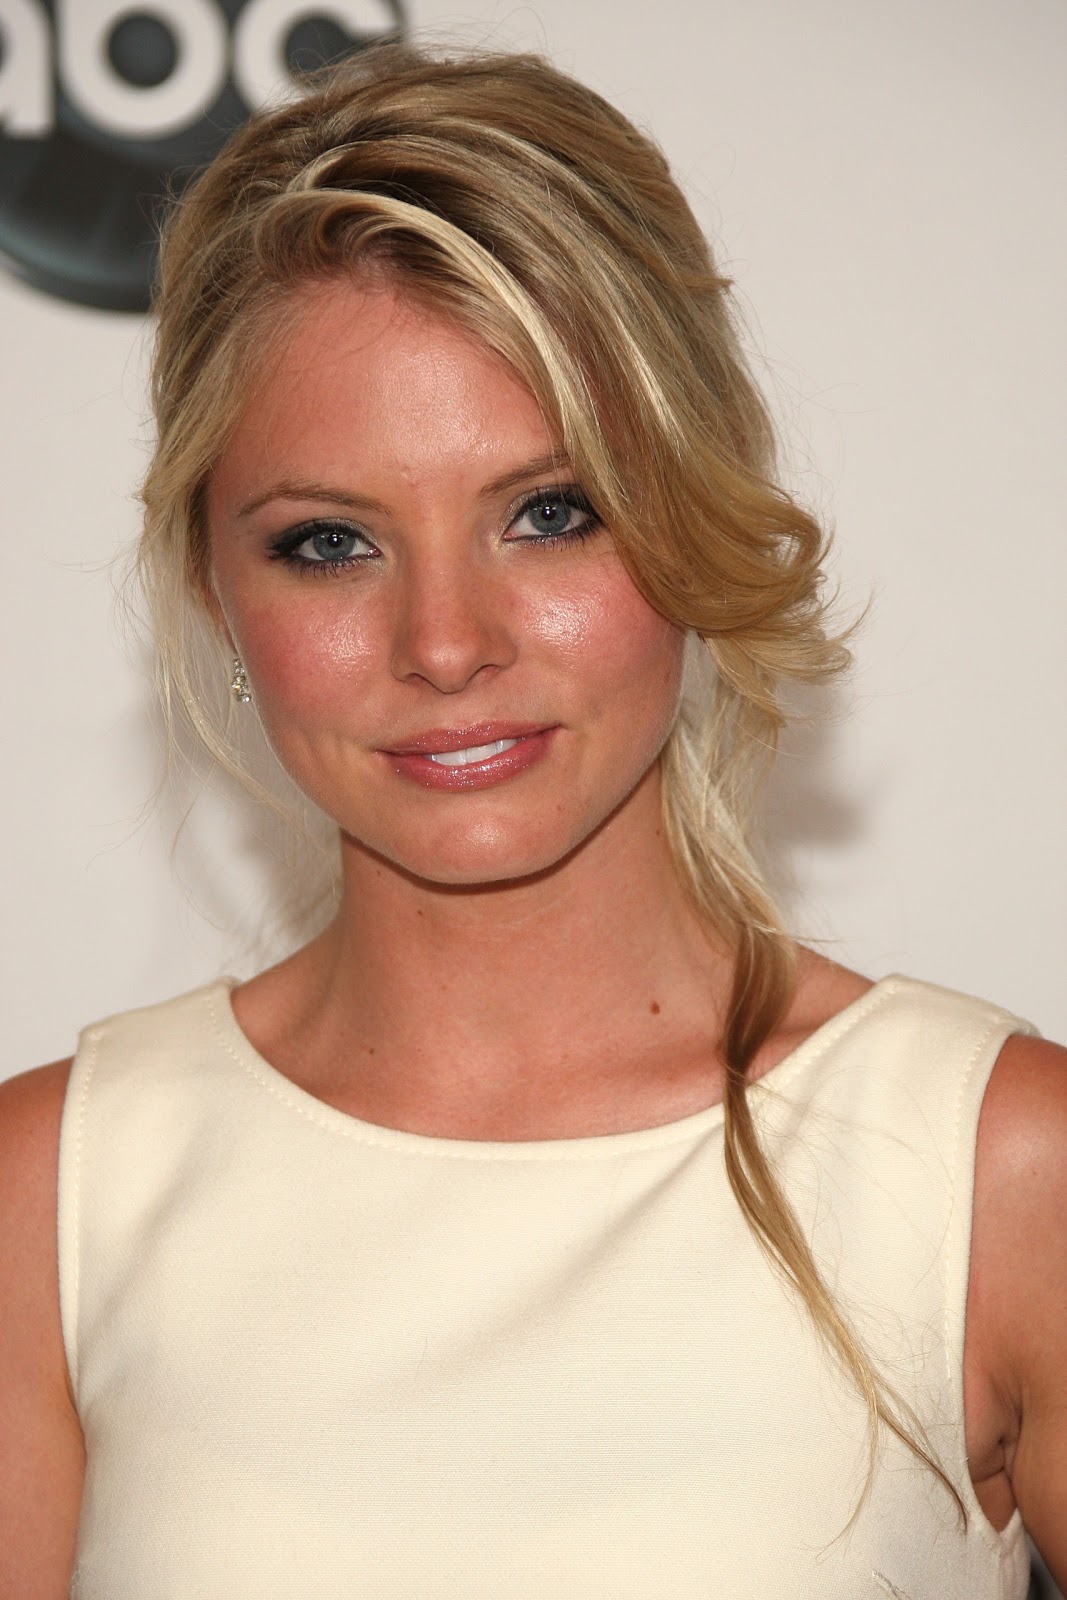 Picture of Kaitlin Doubleday.